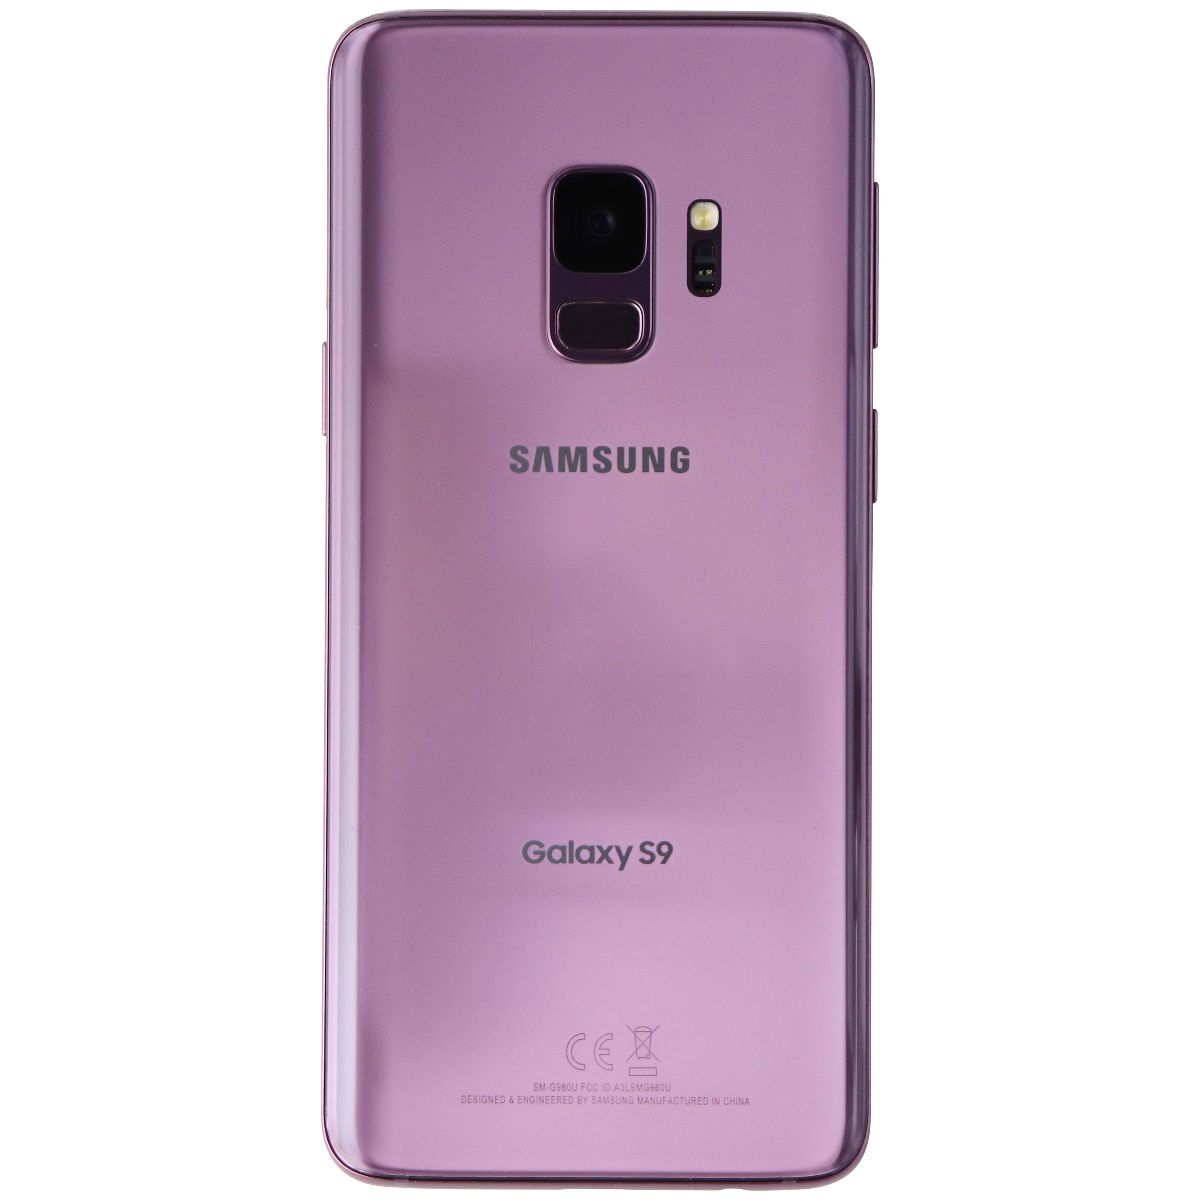 Samsung Galaxy S9 (5.8-in) Smartphone (SM-G960U) Unlocked - 64GB / Lilac Purple Cell Phones & Smartphones Samsung    - Simple Cell Bulk Wholesale Pricing - USA Seller